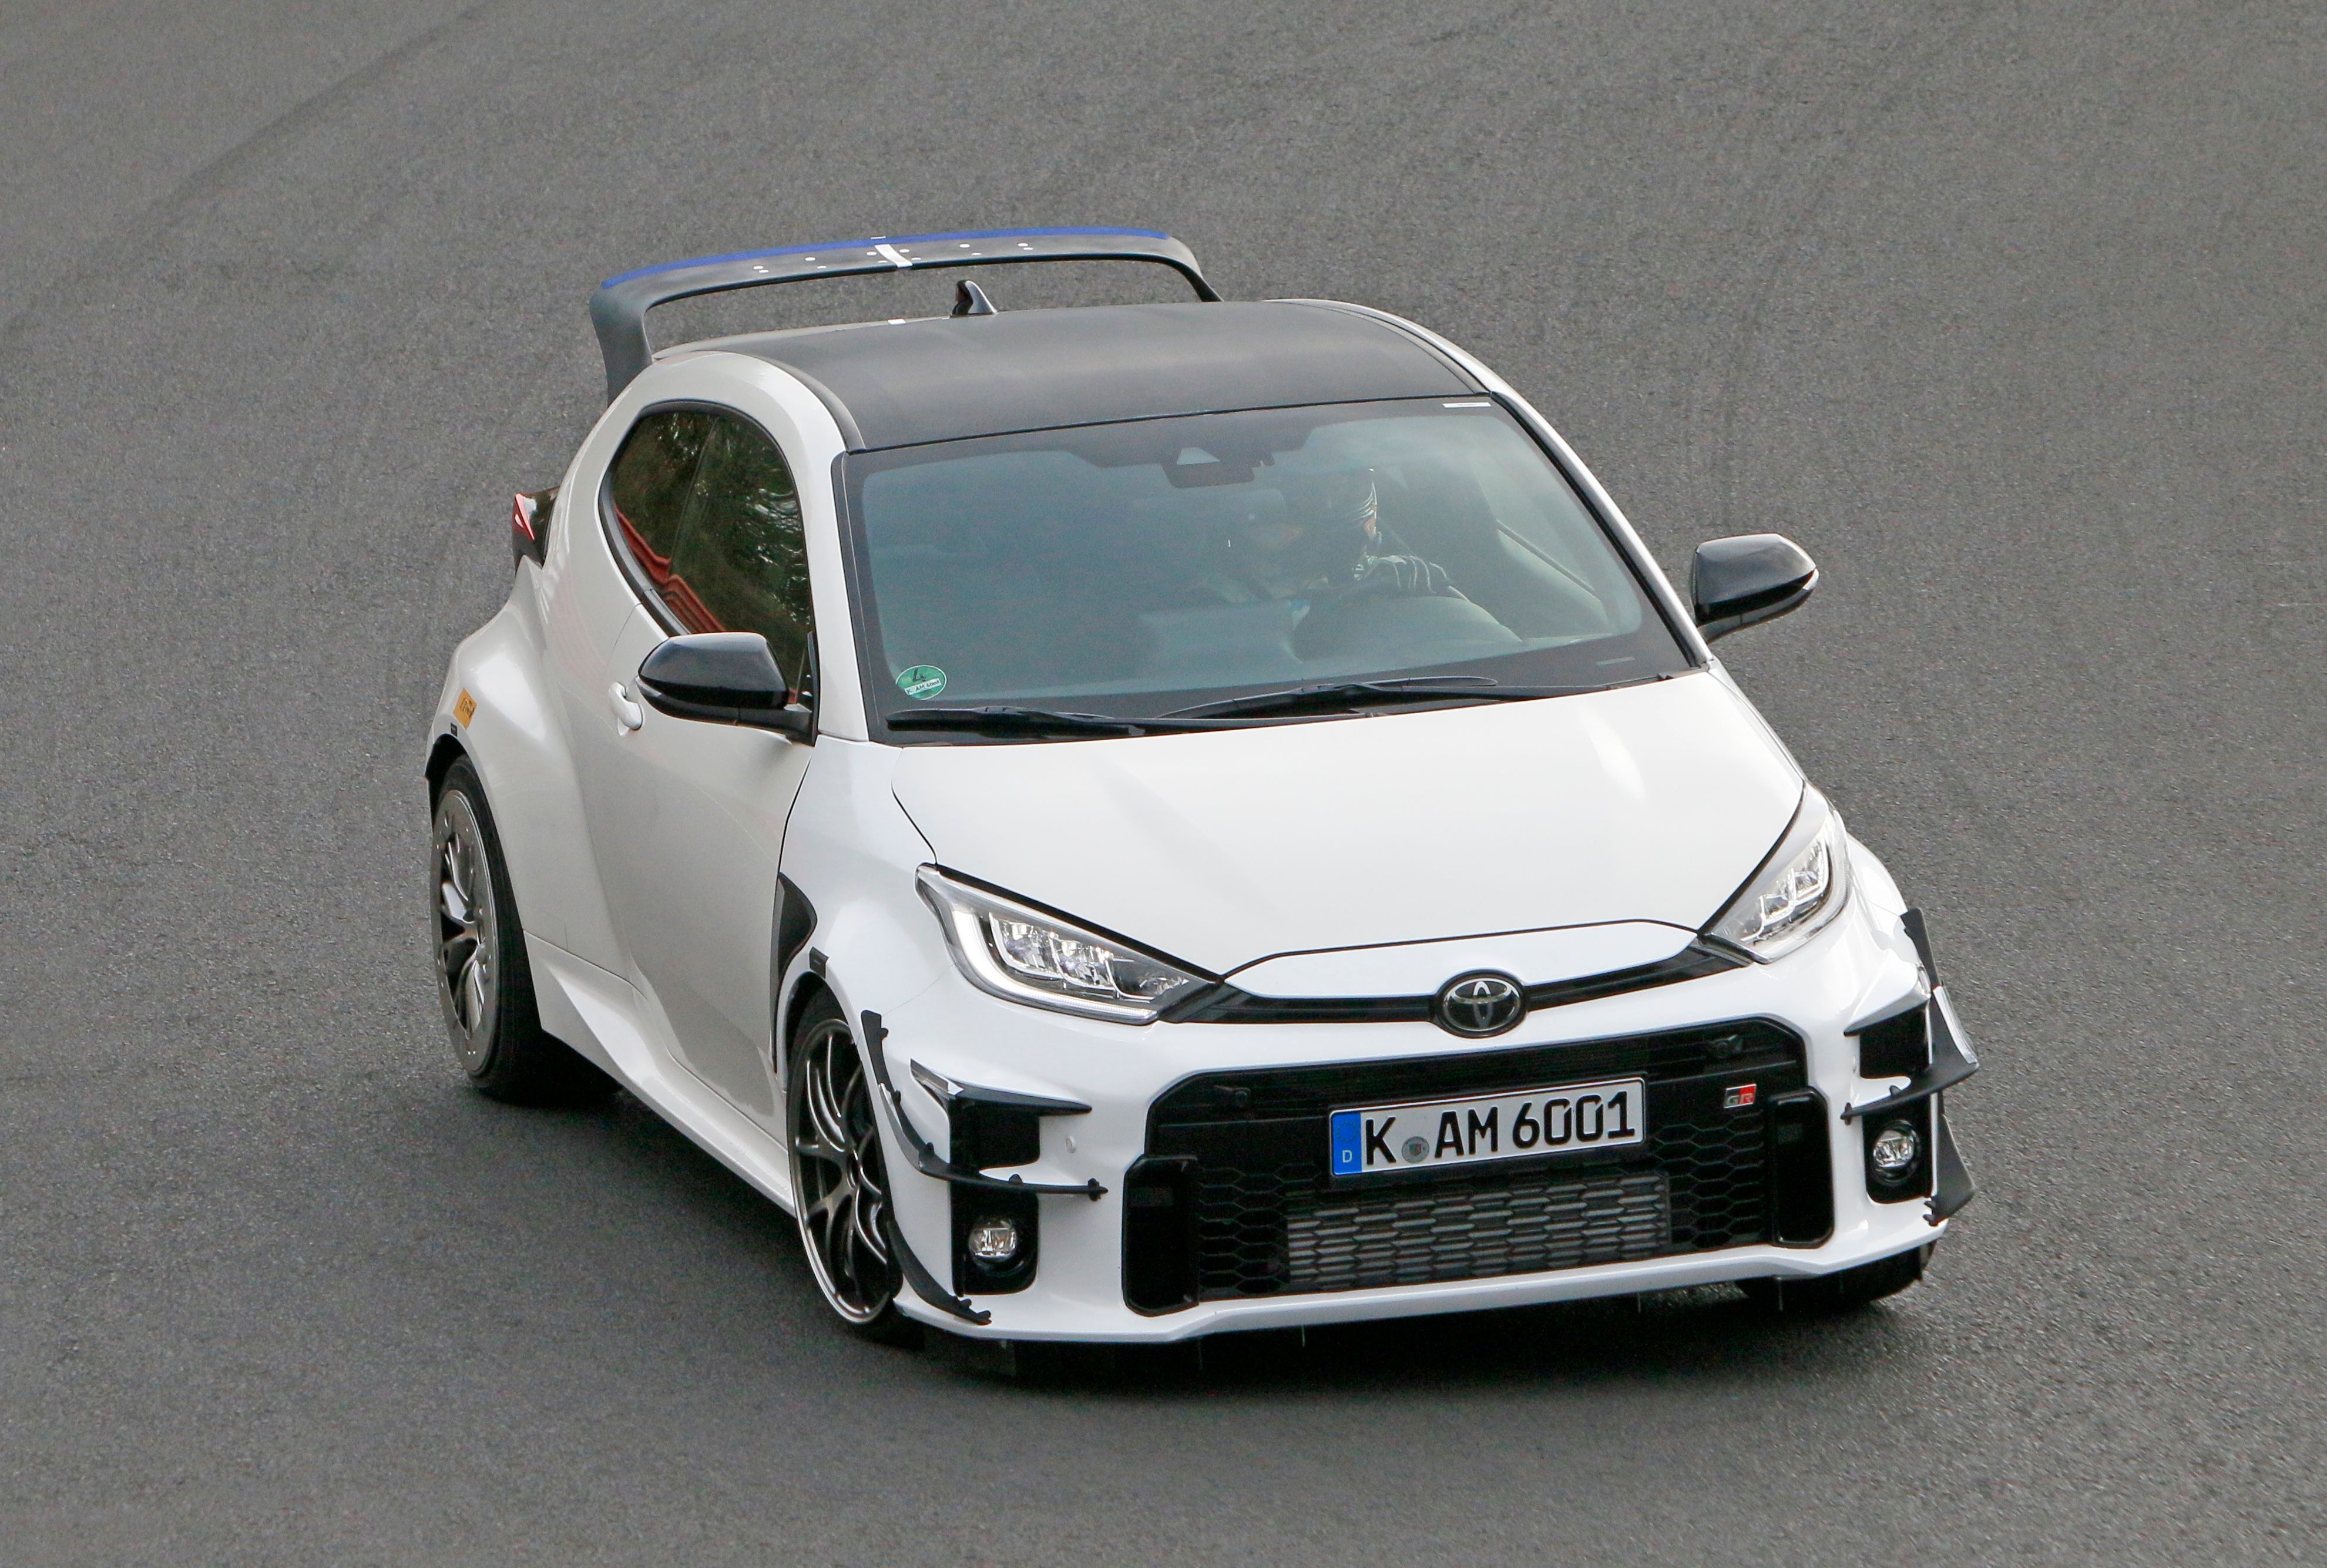 Toyota GR Yaris gets race upgrades and it looks menacing